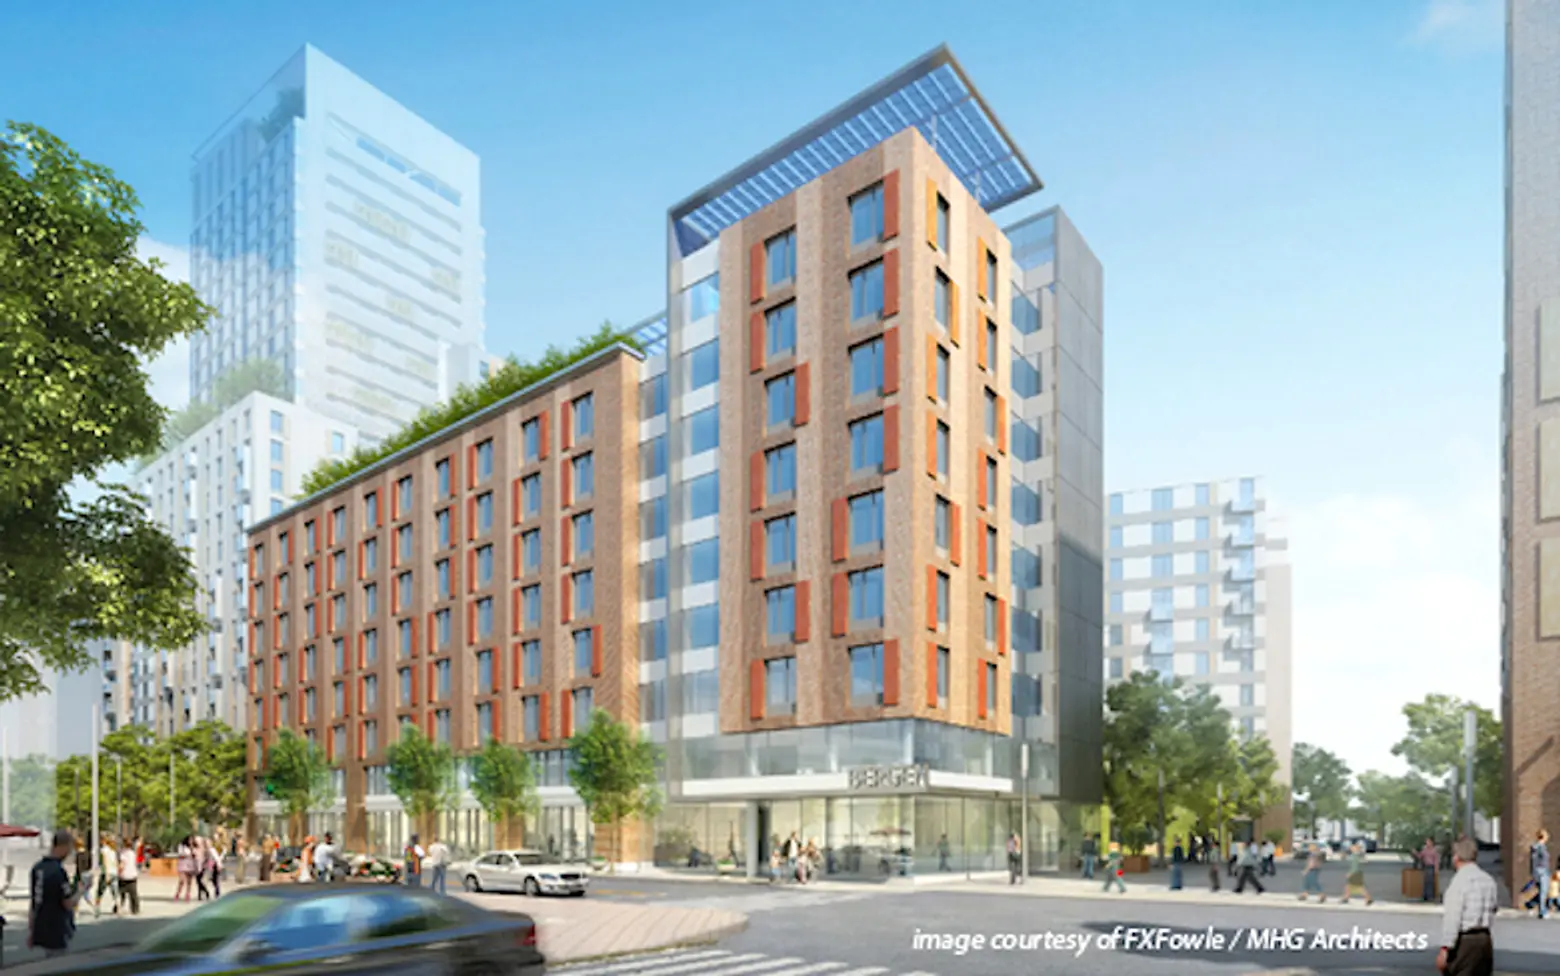 Apply for 63 affordable studios at new La Central development in the Bronx for $650/month